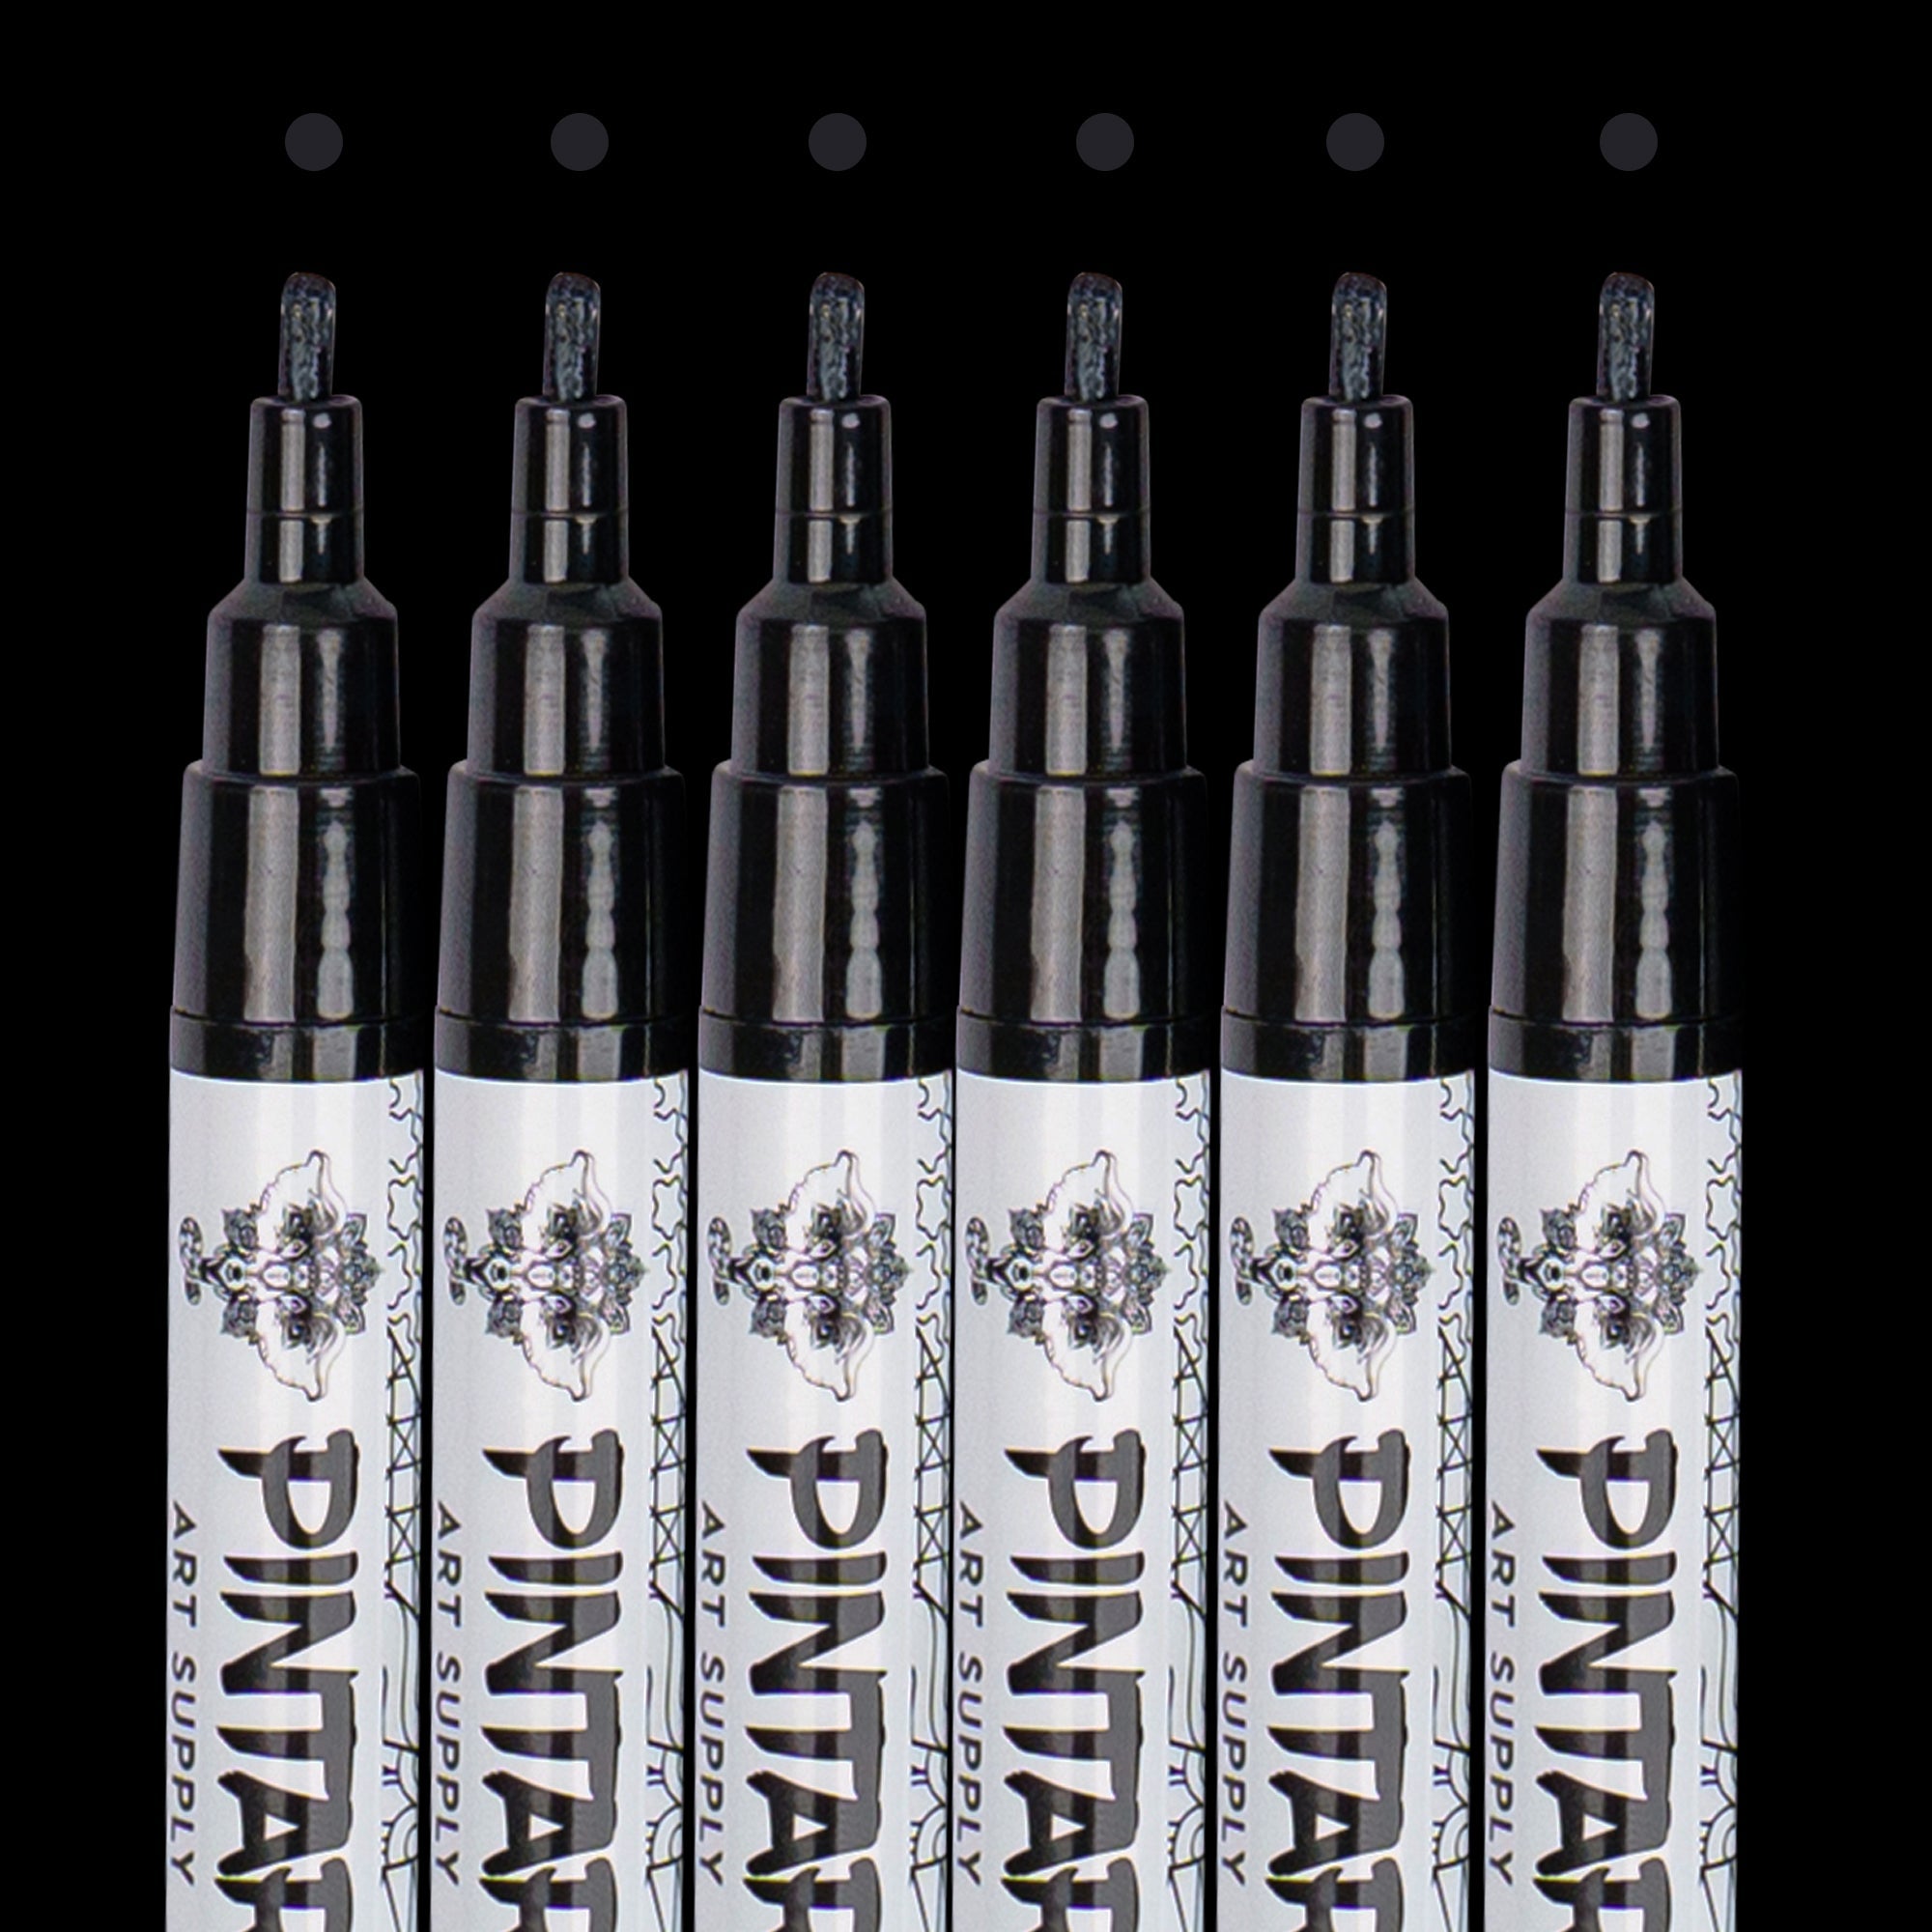 3 Black 3 White Paint Markers 2mm Tip Acrylic Paint Pens for Rock